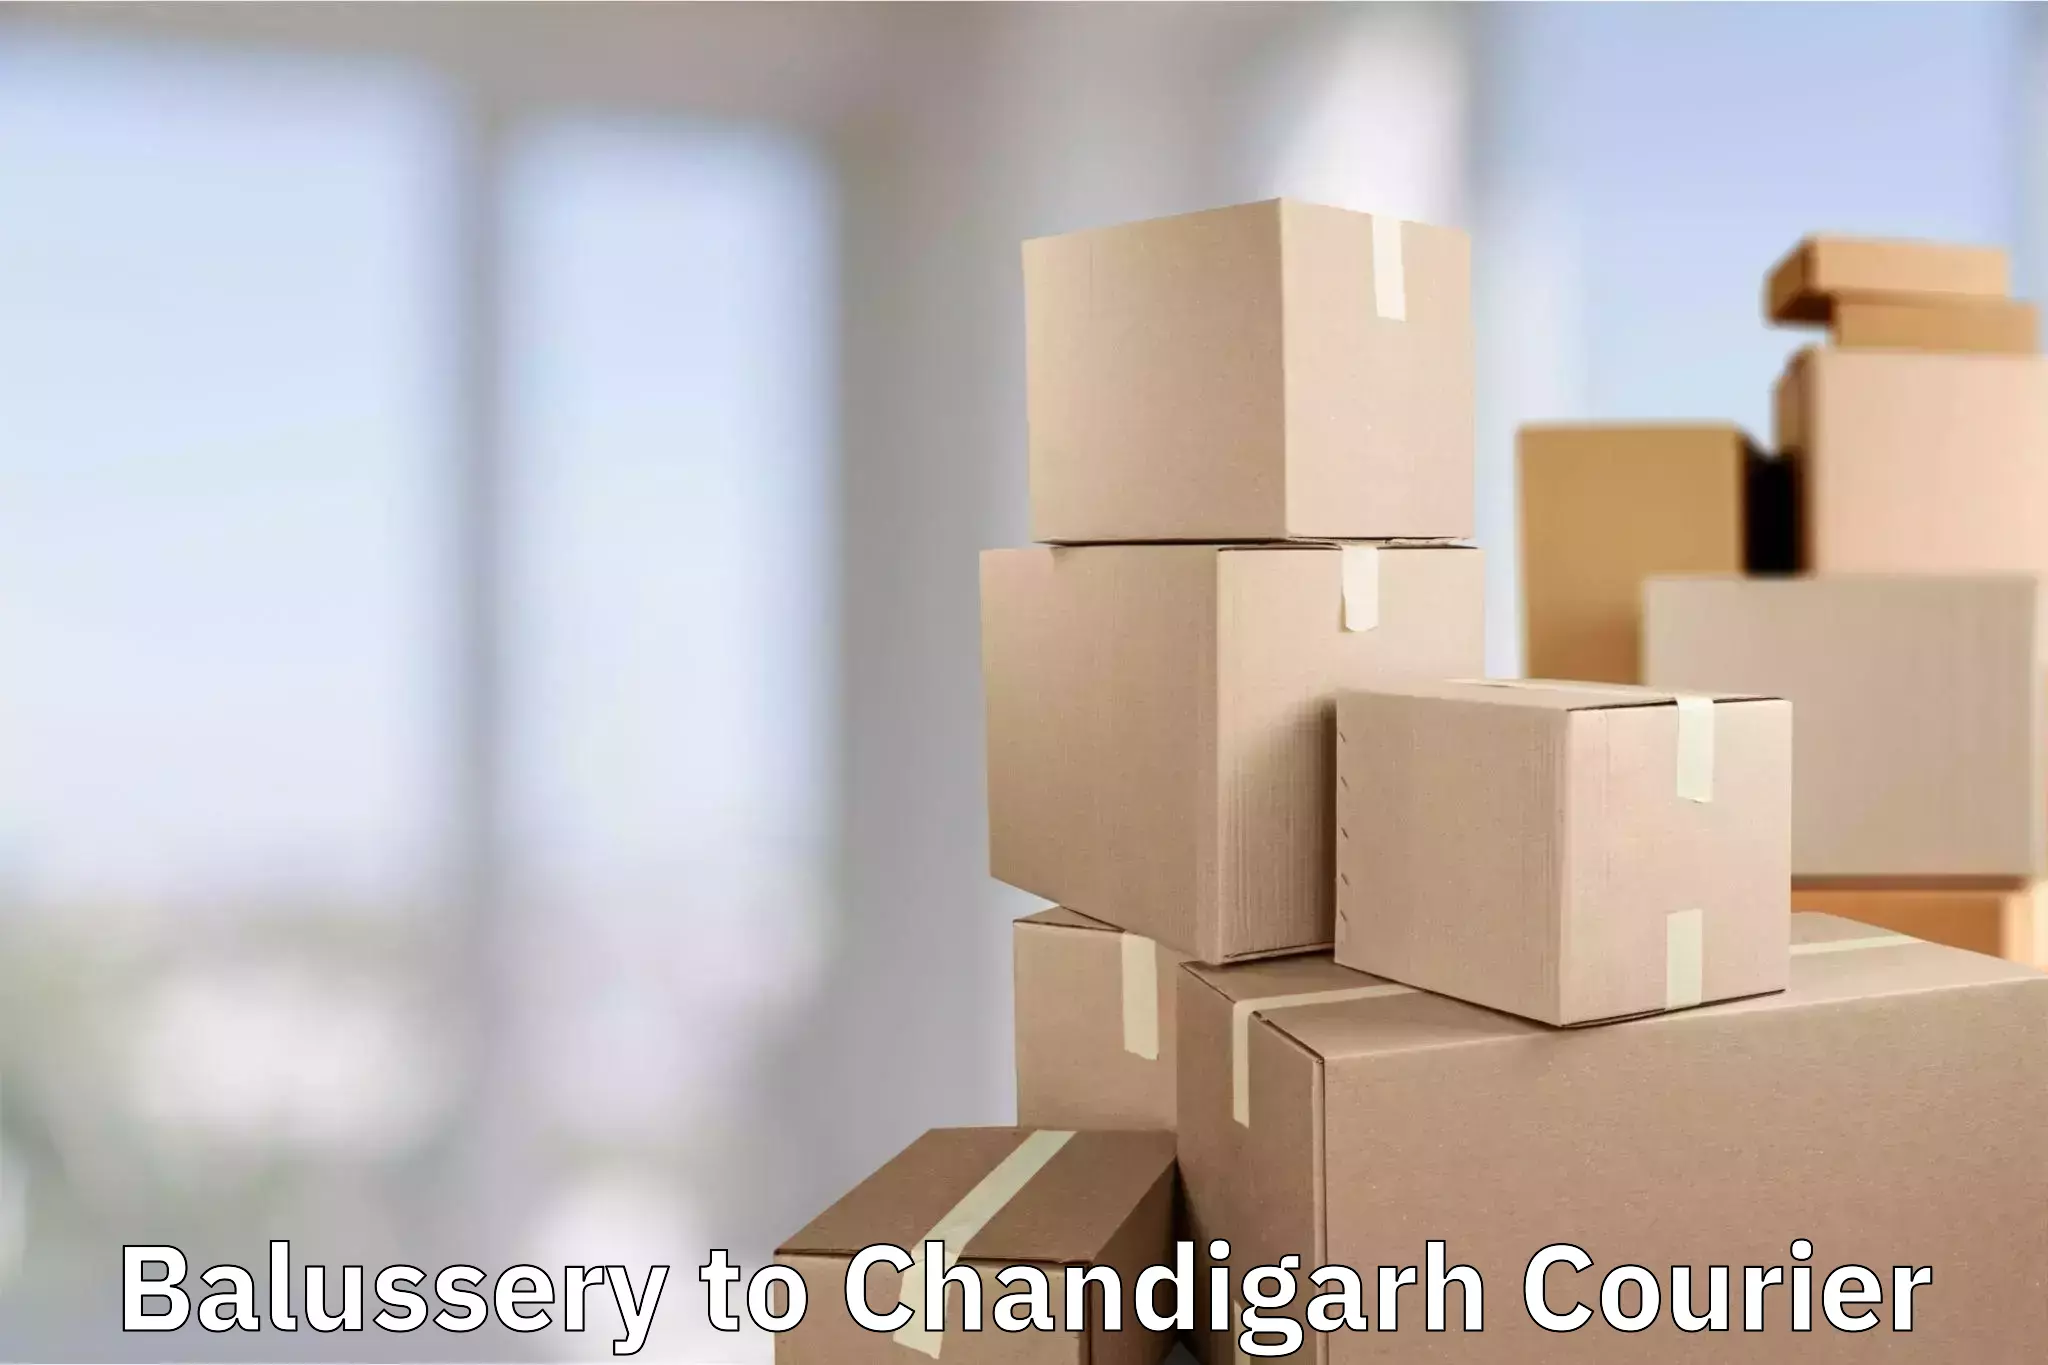 Luggage transport consultancy Balussery to Chandigarh